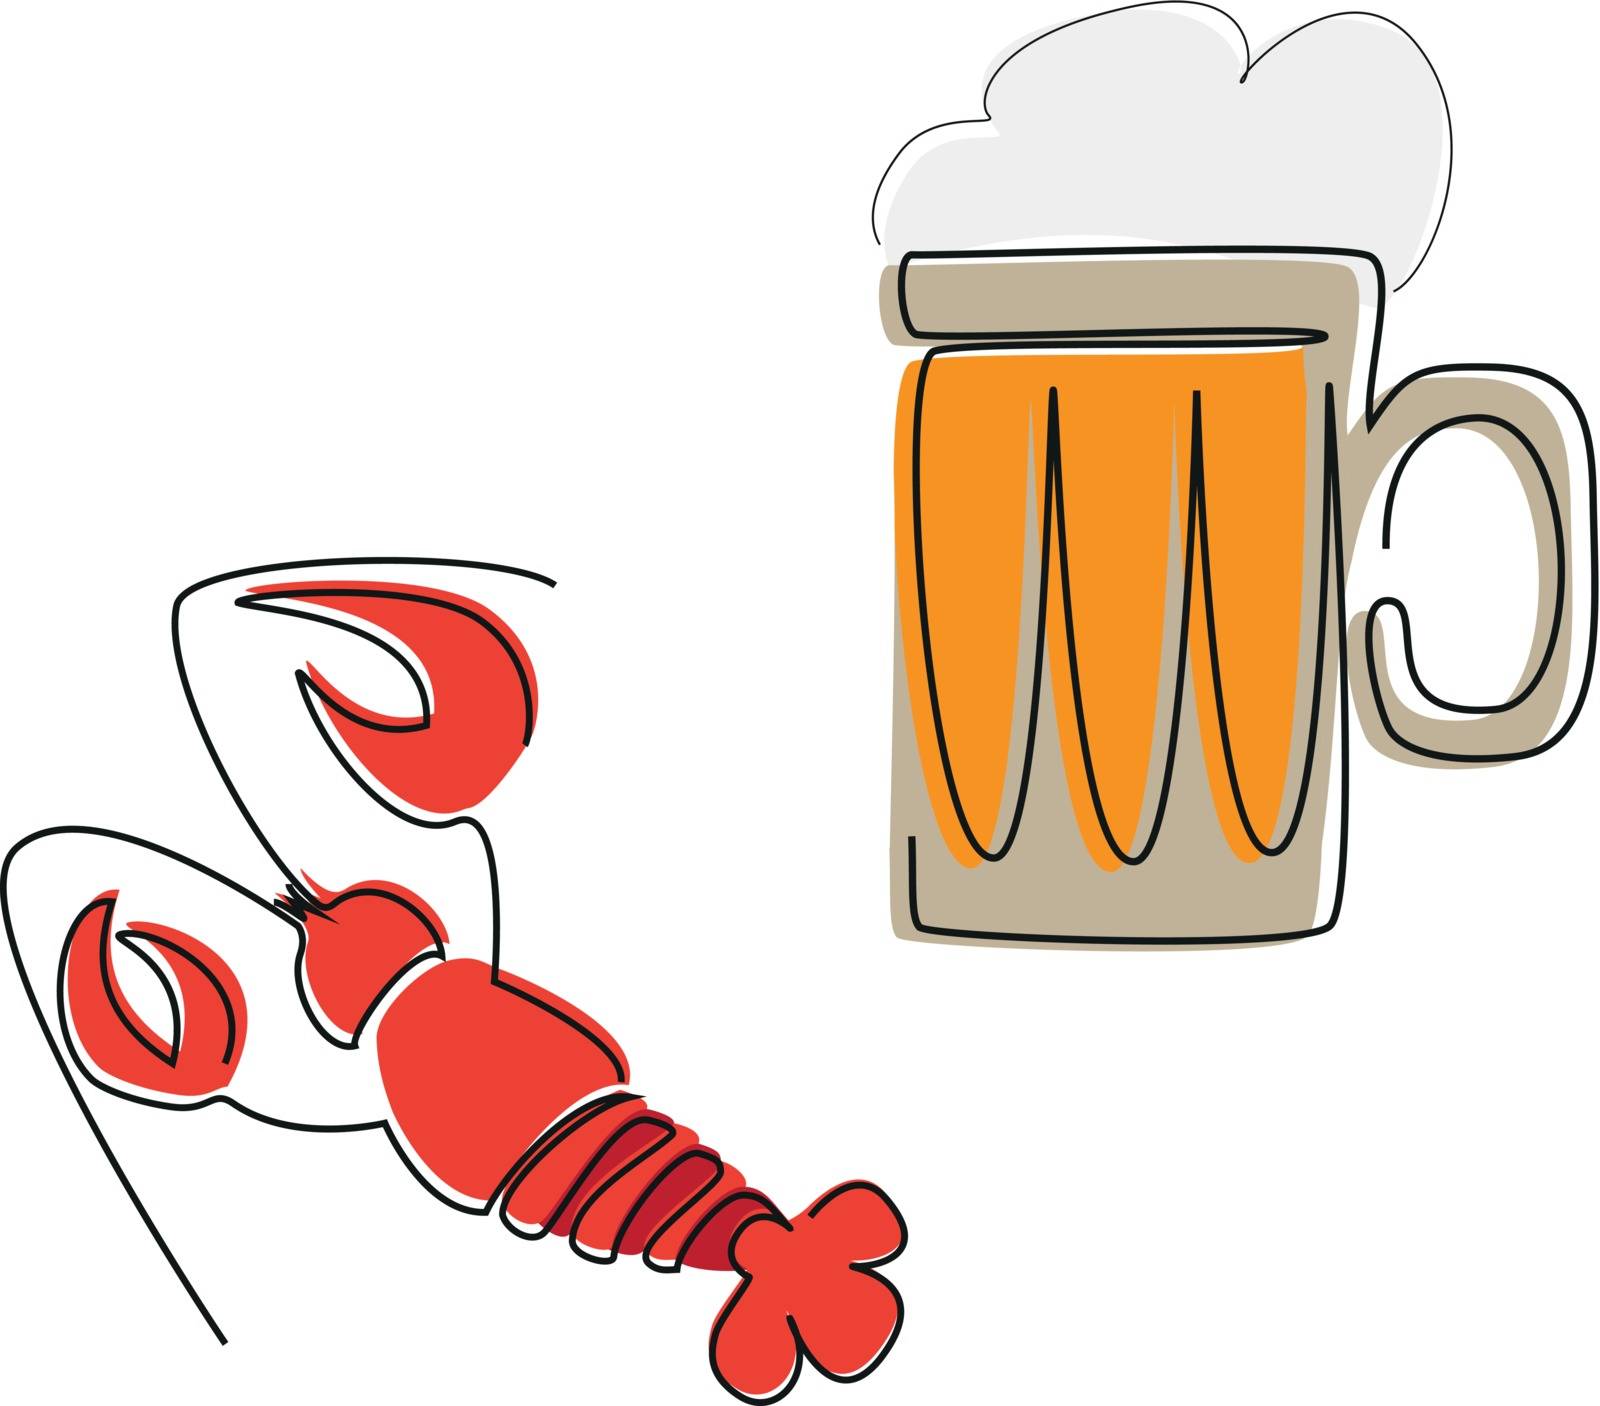 mug of beer with foam and a lobster, isolated objects